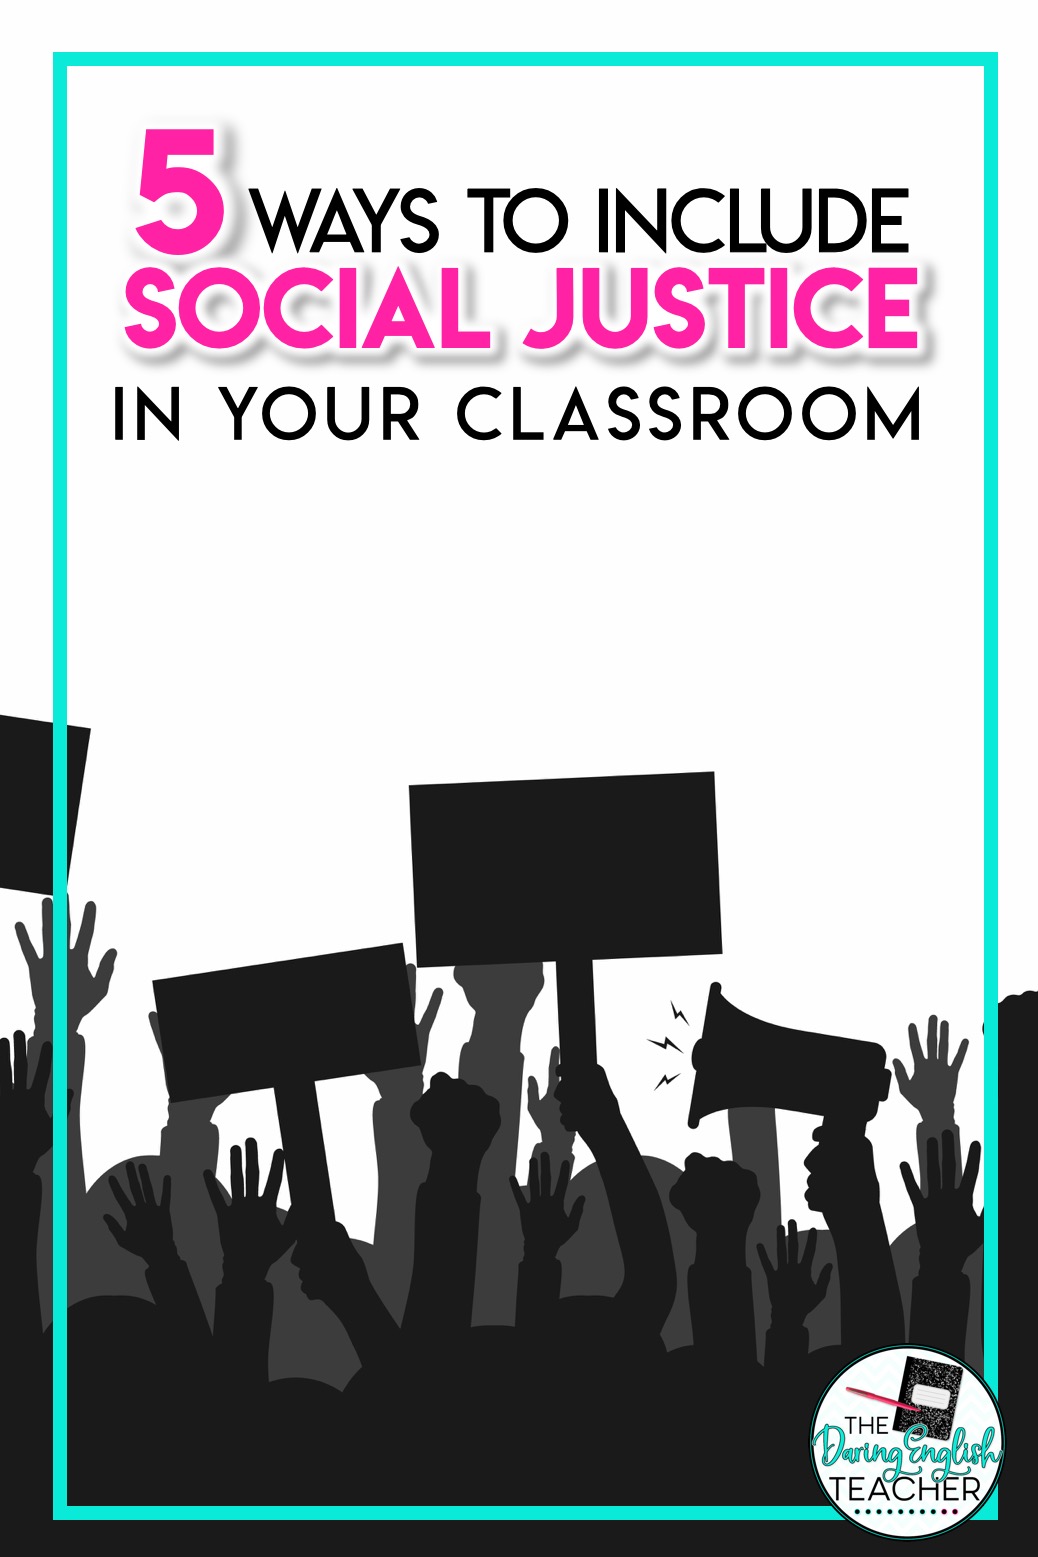 5 Ways to Incorporate Social Justice into the Classroom